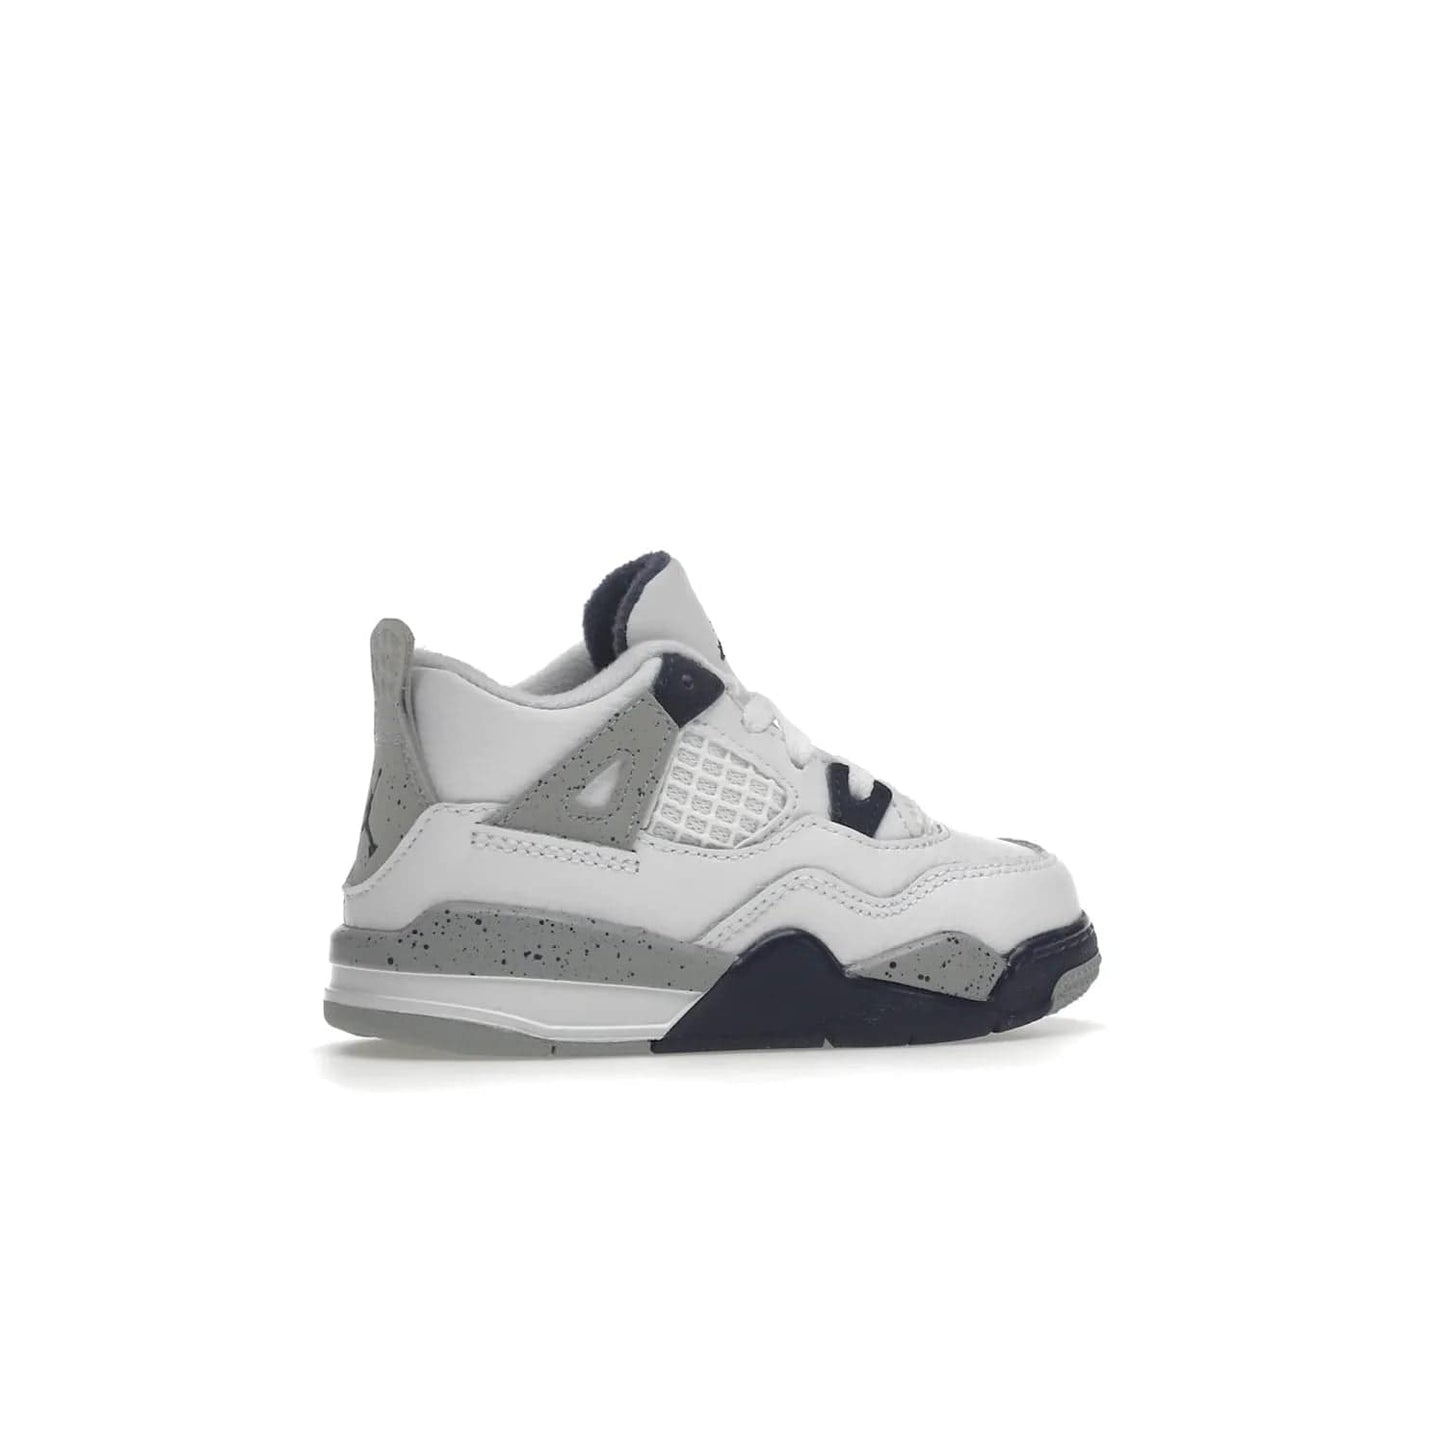 Jordan 4 Retro Midnight Navy (TD) - Image 35 - Only at www.BallersClubKickz.com - Introducing the Jordan 4 Retro Midnight Navy (TD) for kids. White leather upper with navy and grey accents plus fire red detailing. Perfect for everyday wear. Get yours before they sell out.